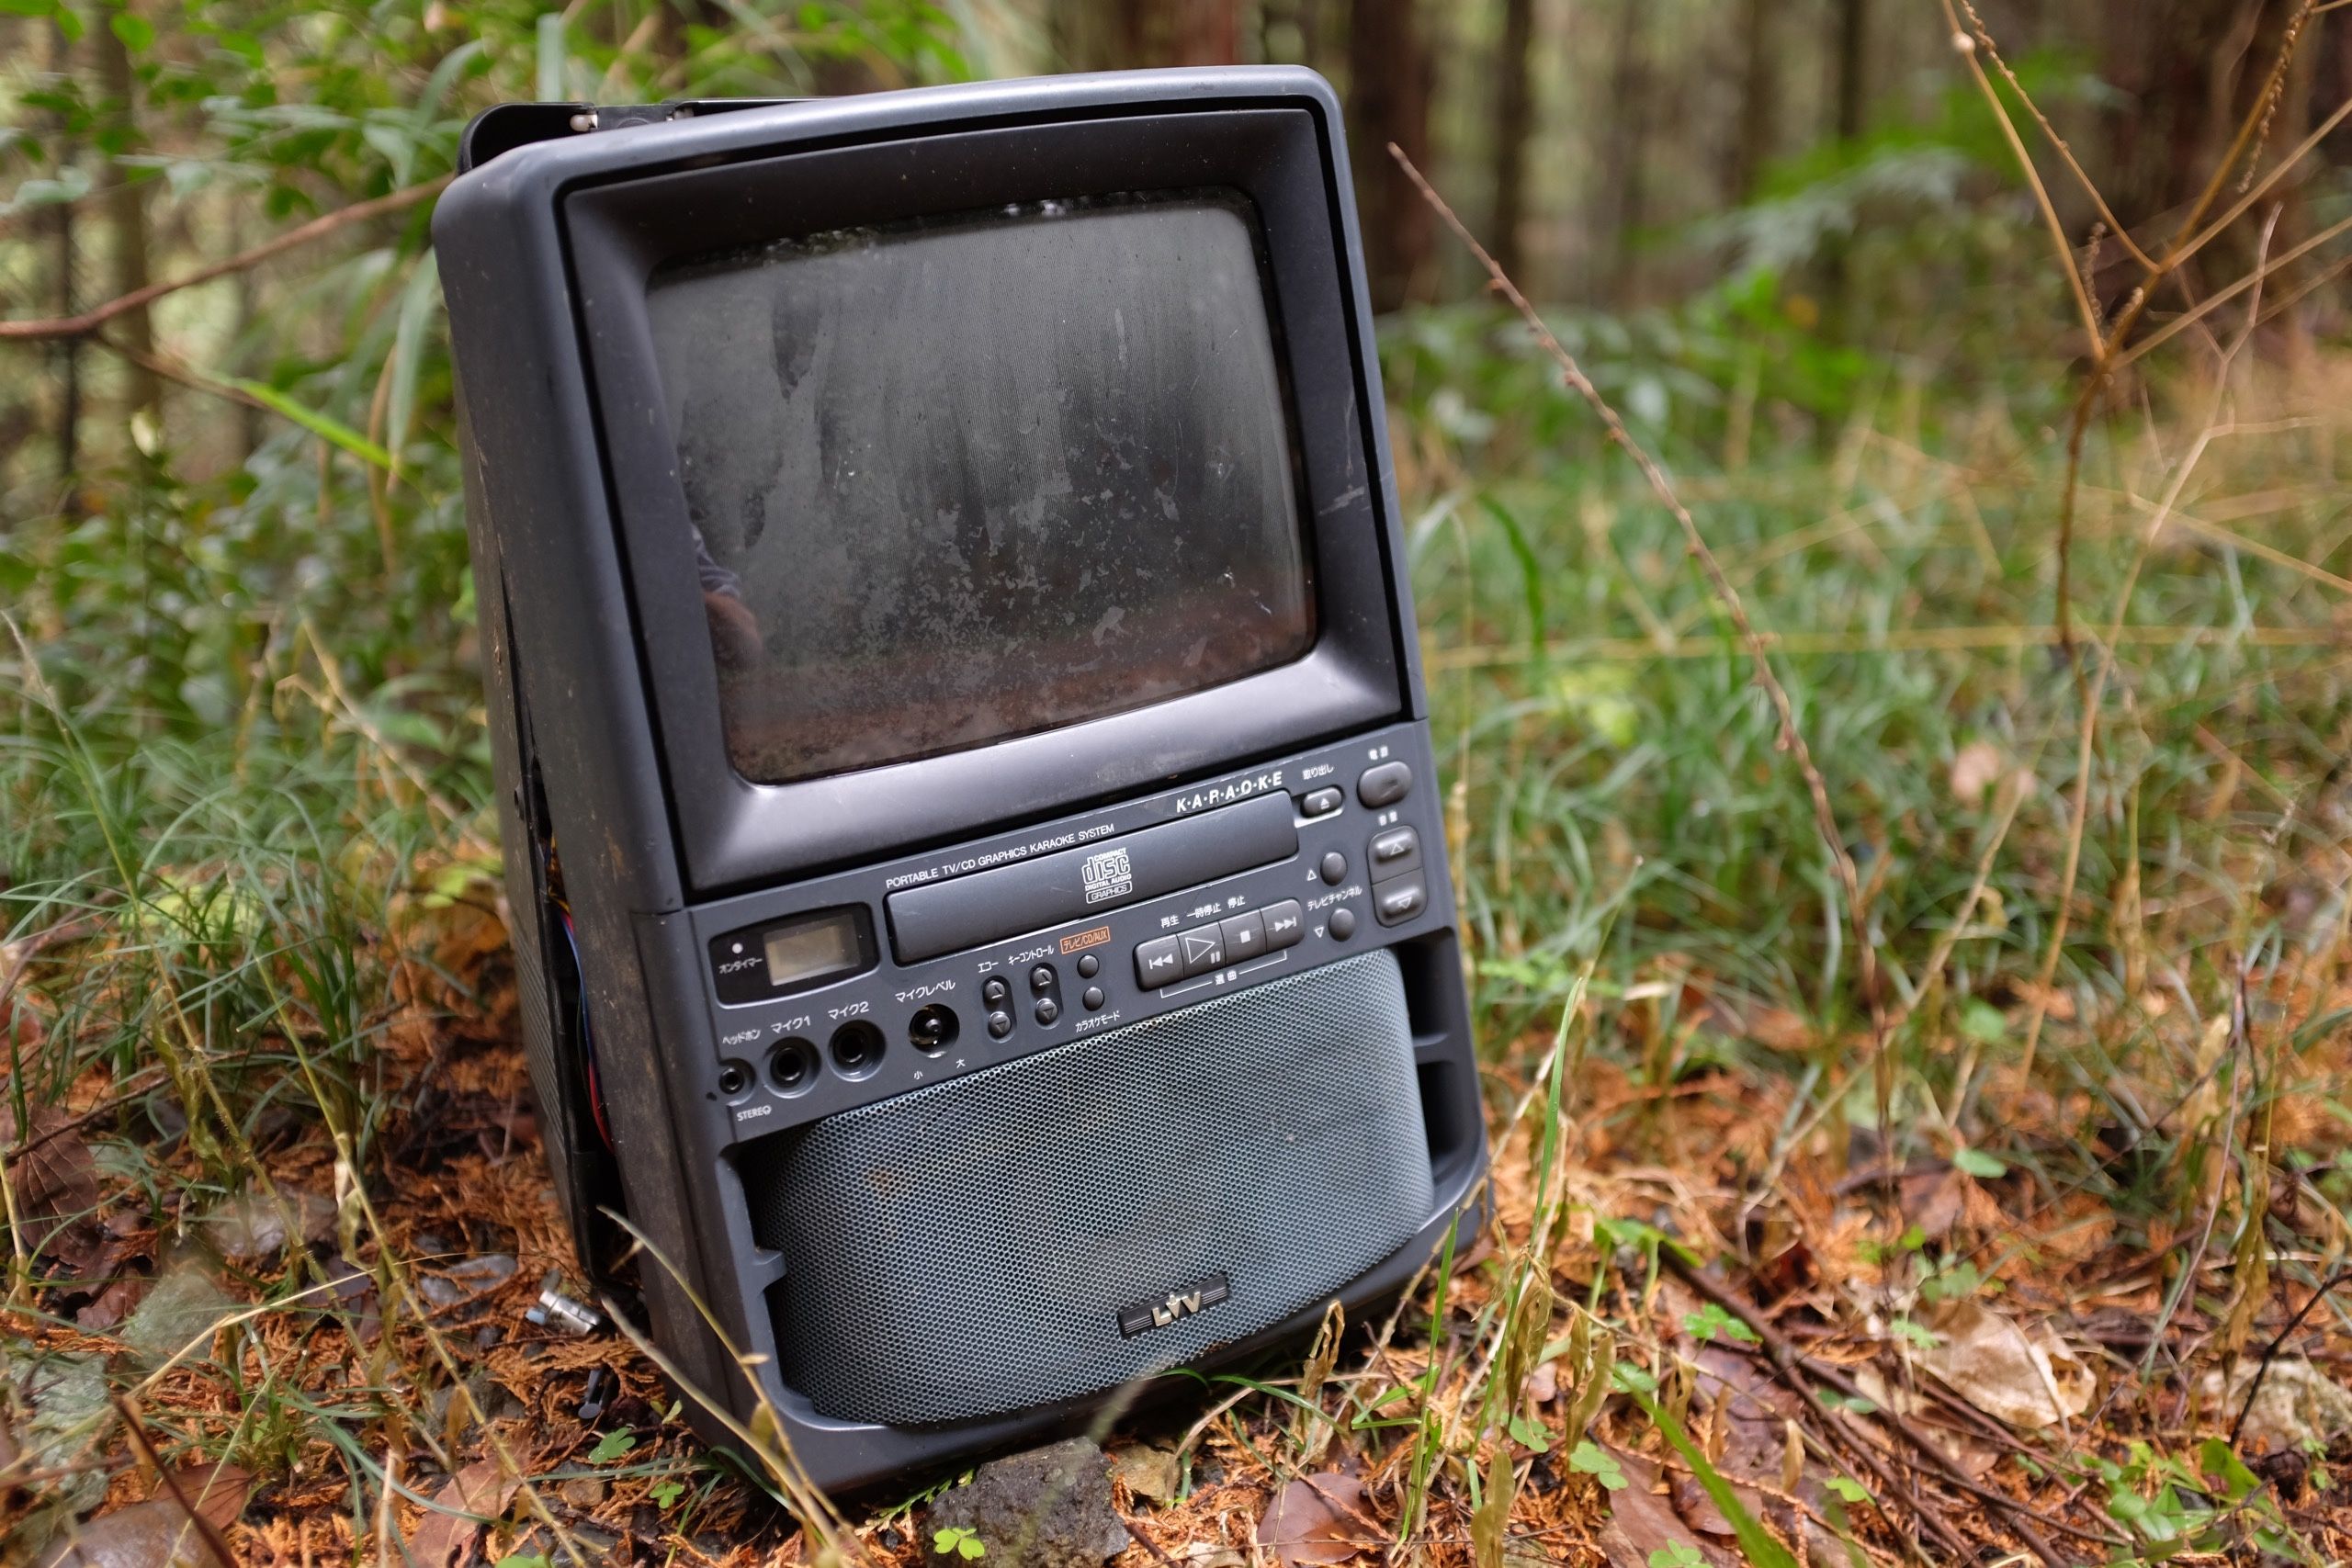 An all-in-one karaoke machine in the undergrowth of a forest, made of a small TV, a CD player, and a speaker.